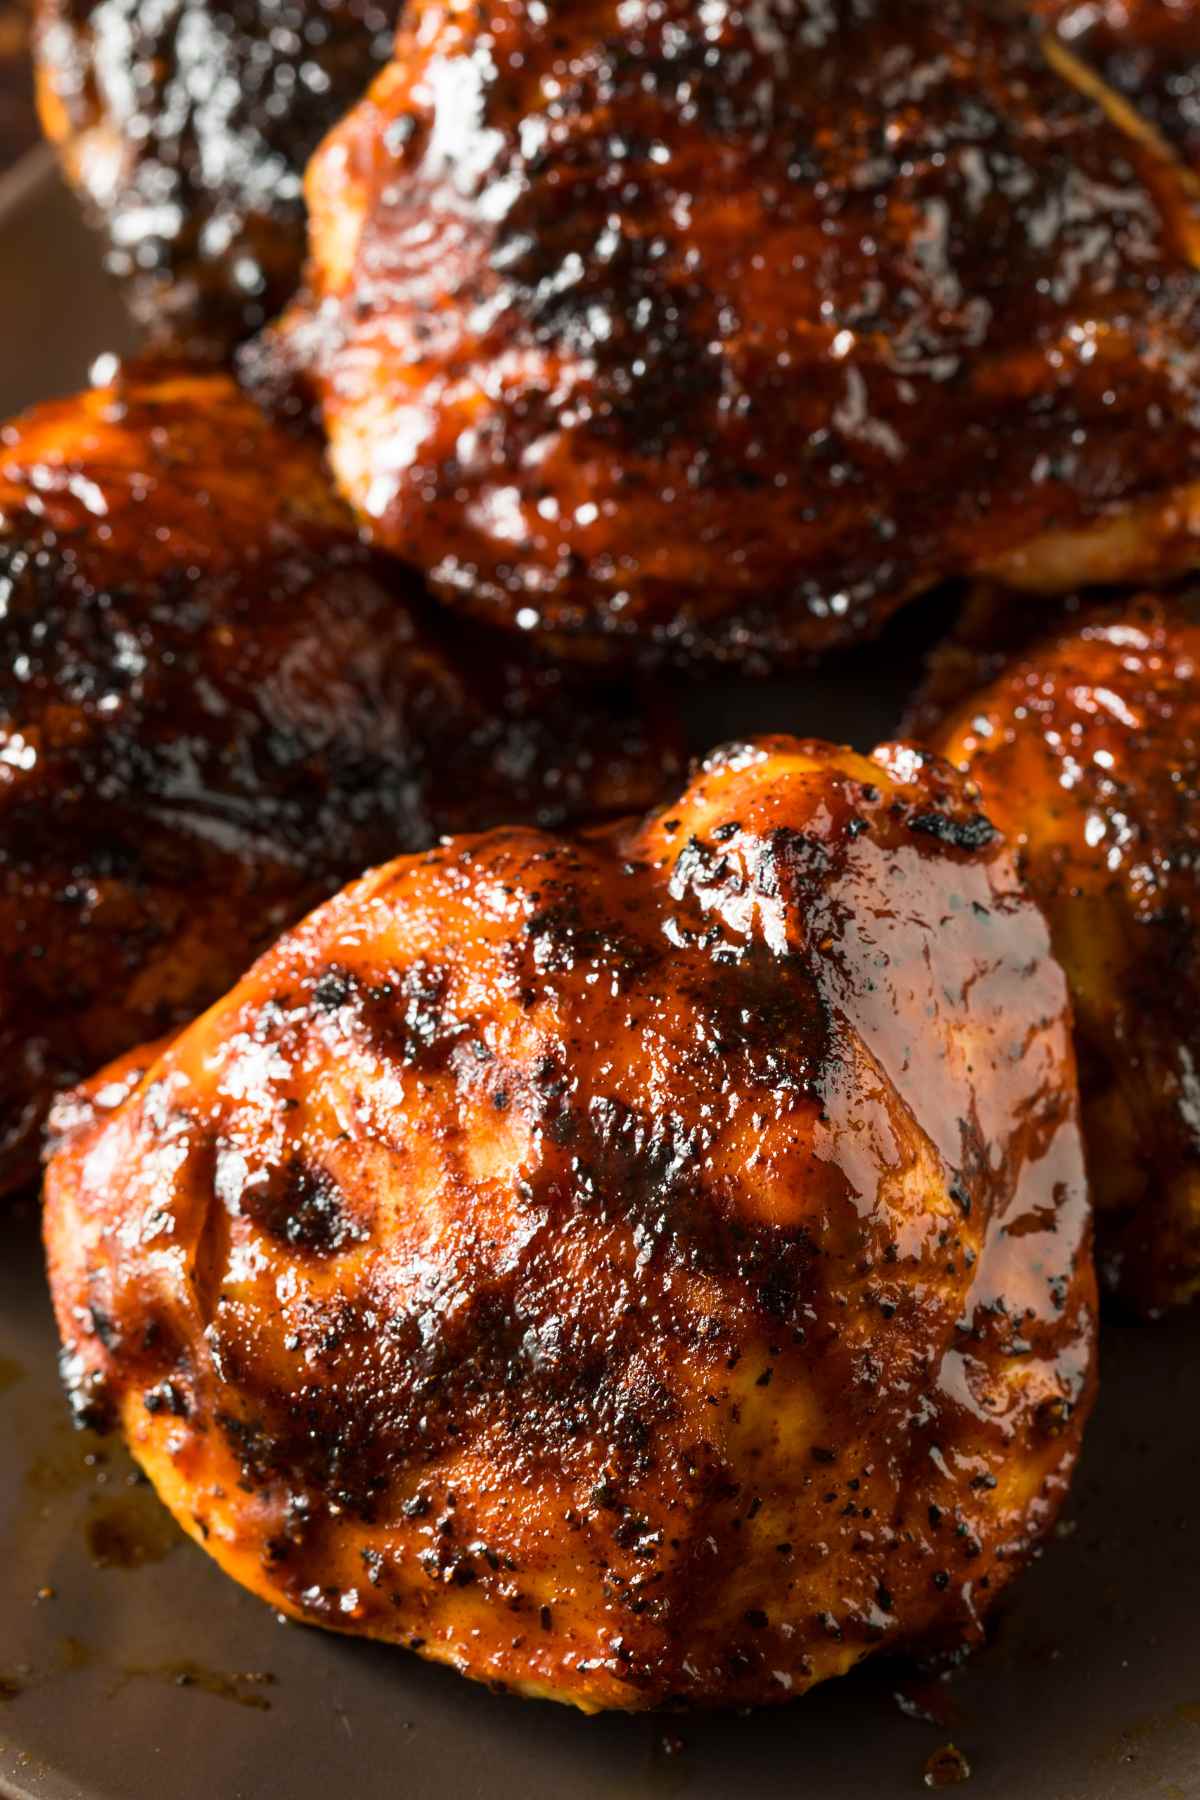 What’s the best Internal Temp for Grilled Chicken? What about the temperature of the grill? Knowing these two numbers will help you to get the most mouthwatering results. Here’s the ultimate guide for preparing the best grilled chicken at home!